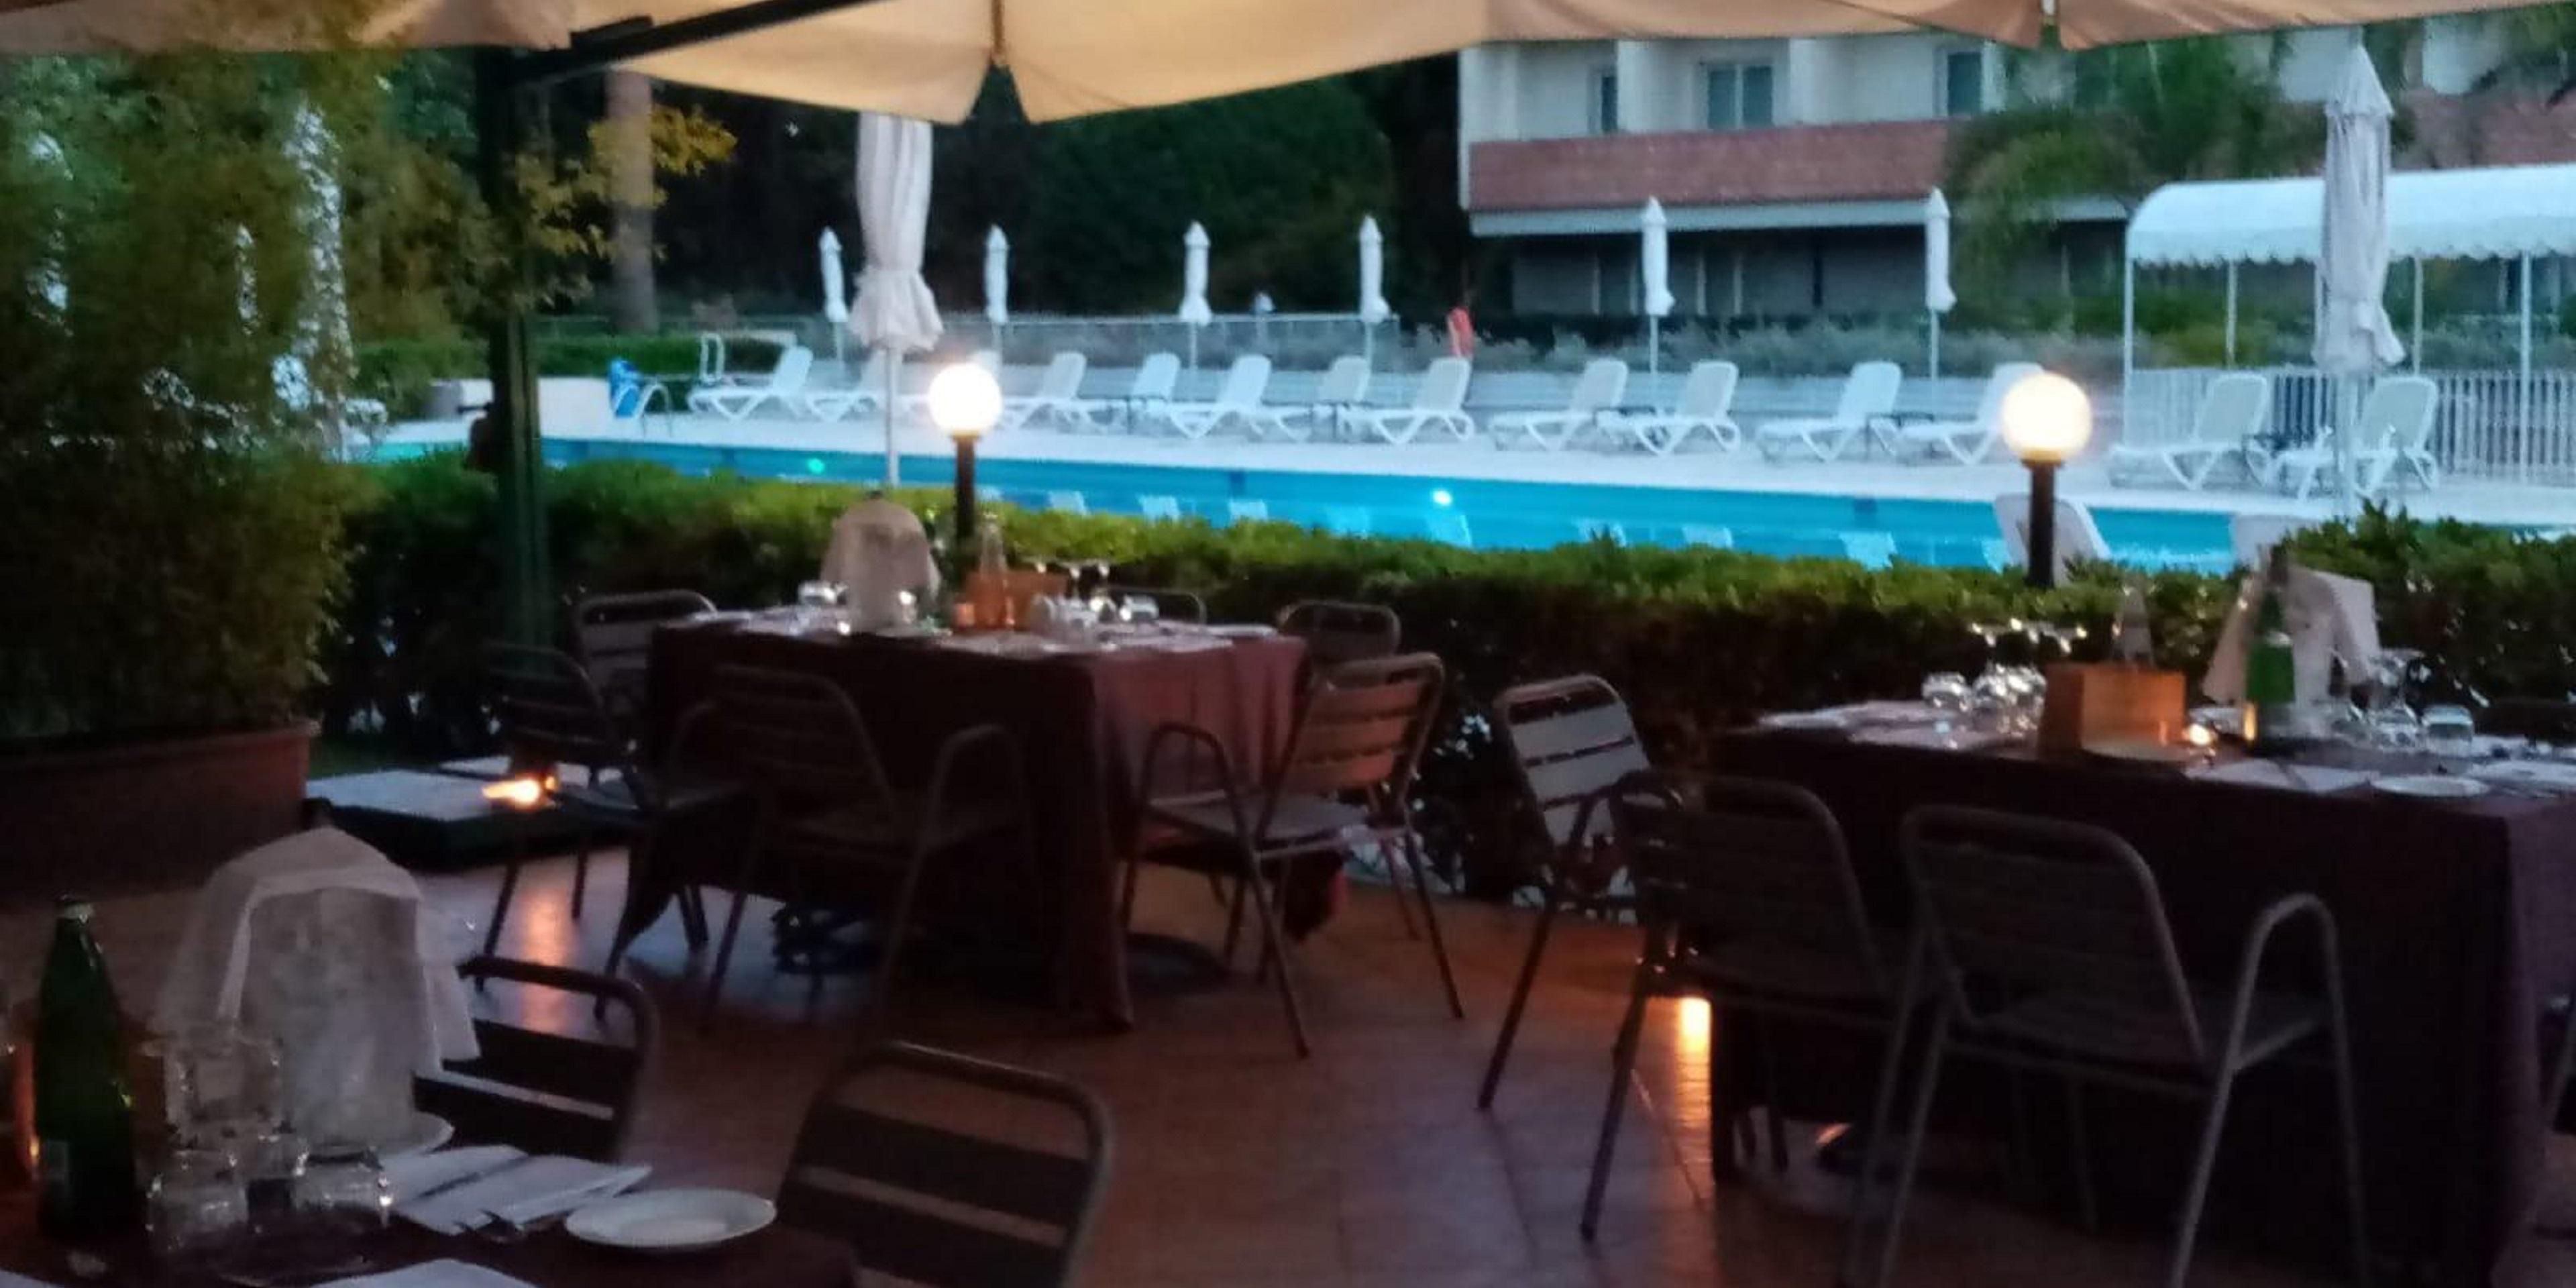 Book your event by the pool